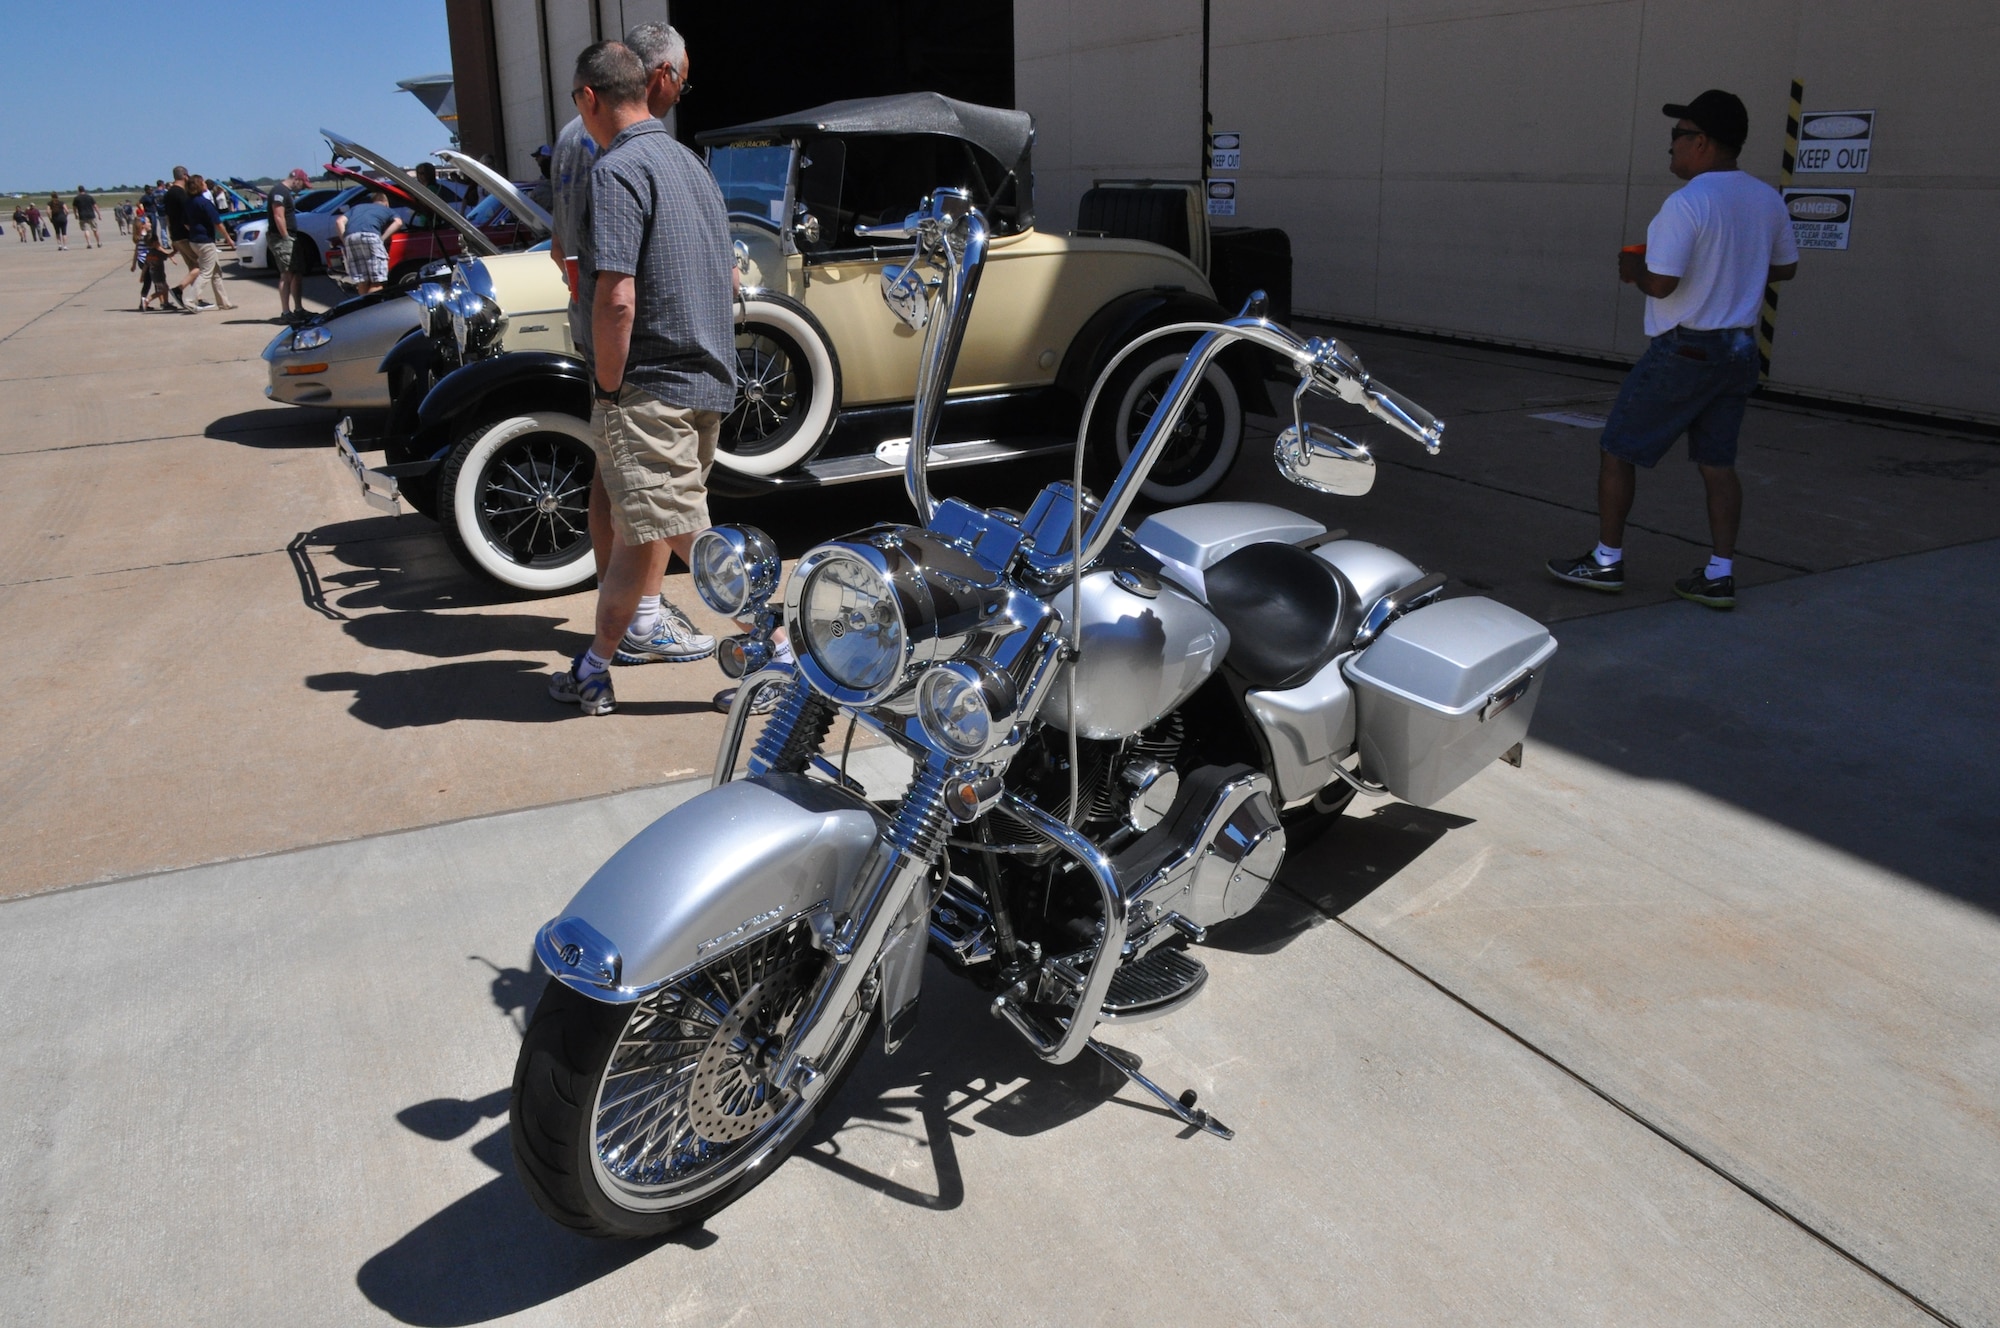 A 2005 Harley Davidson Road King sits on display at the 507th Air Refueling Wing's Family Day Car Show Sept. 12, 2015 at Tinker Air Force Base.  The bike, belonging to Tech. Sgt. Ronald Delay of the 507th Logistics Readiness Squadron, took first place in the show. (U.S. Air Force photo by Tech. Sgt. Charles Taylor)